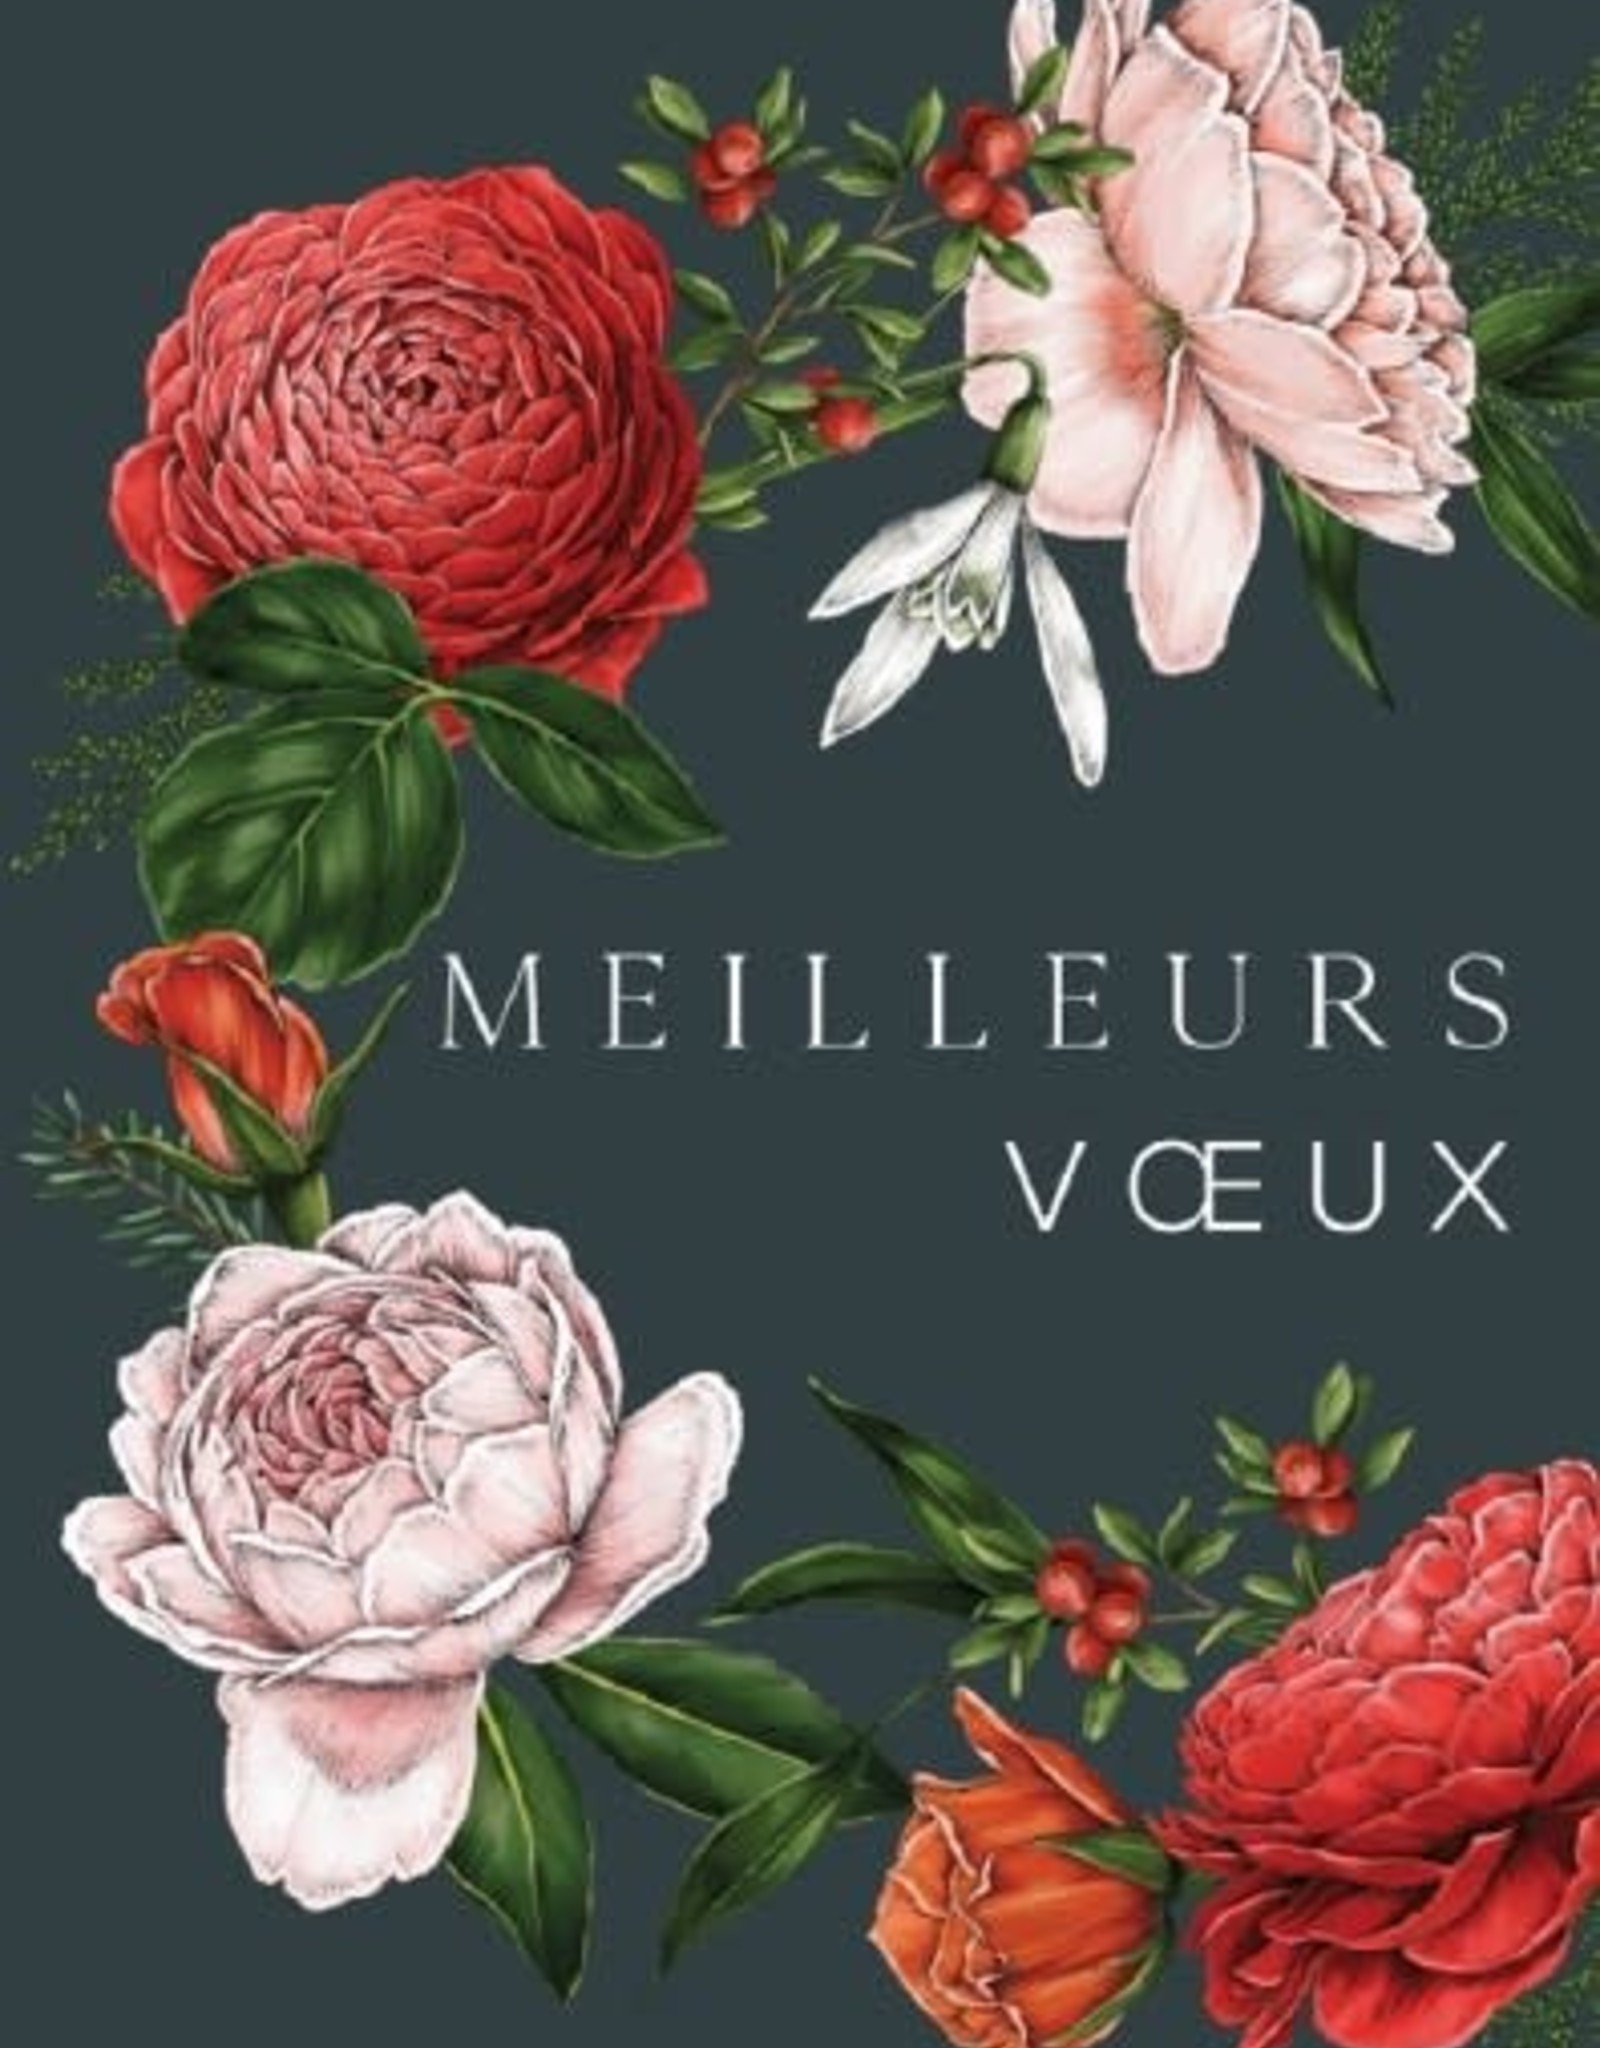 "Meilleurs Voeux" (Best Wishes) Greeting Card! Made in France